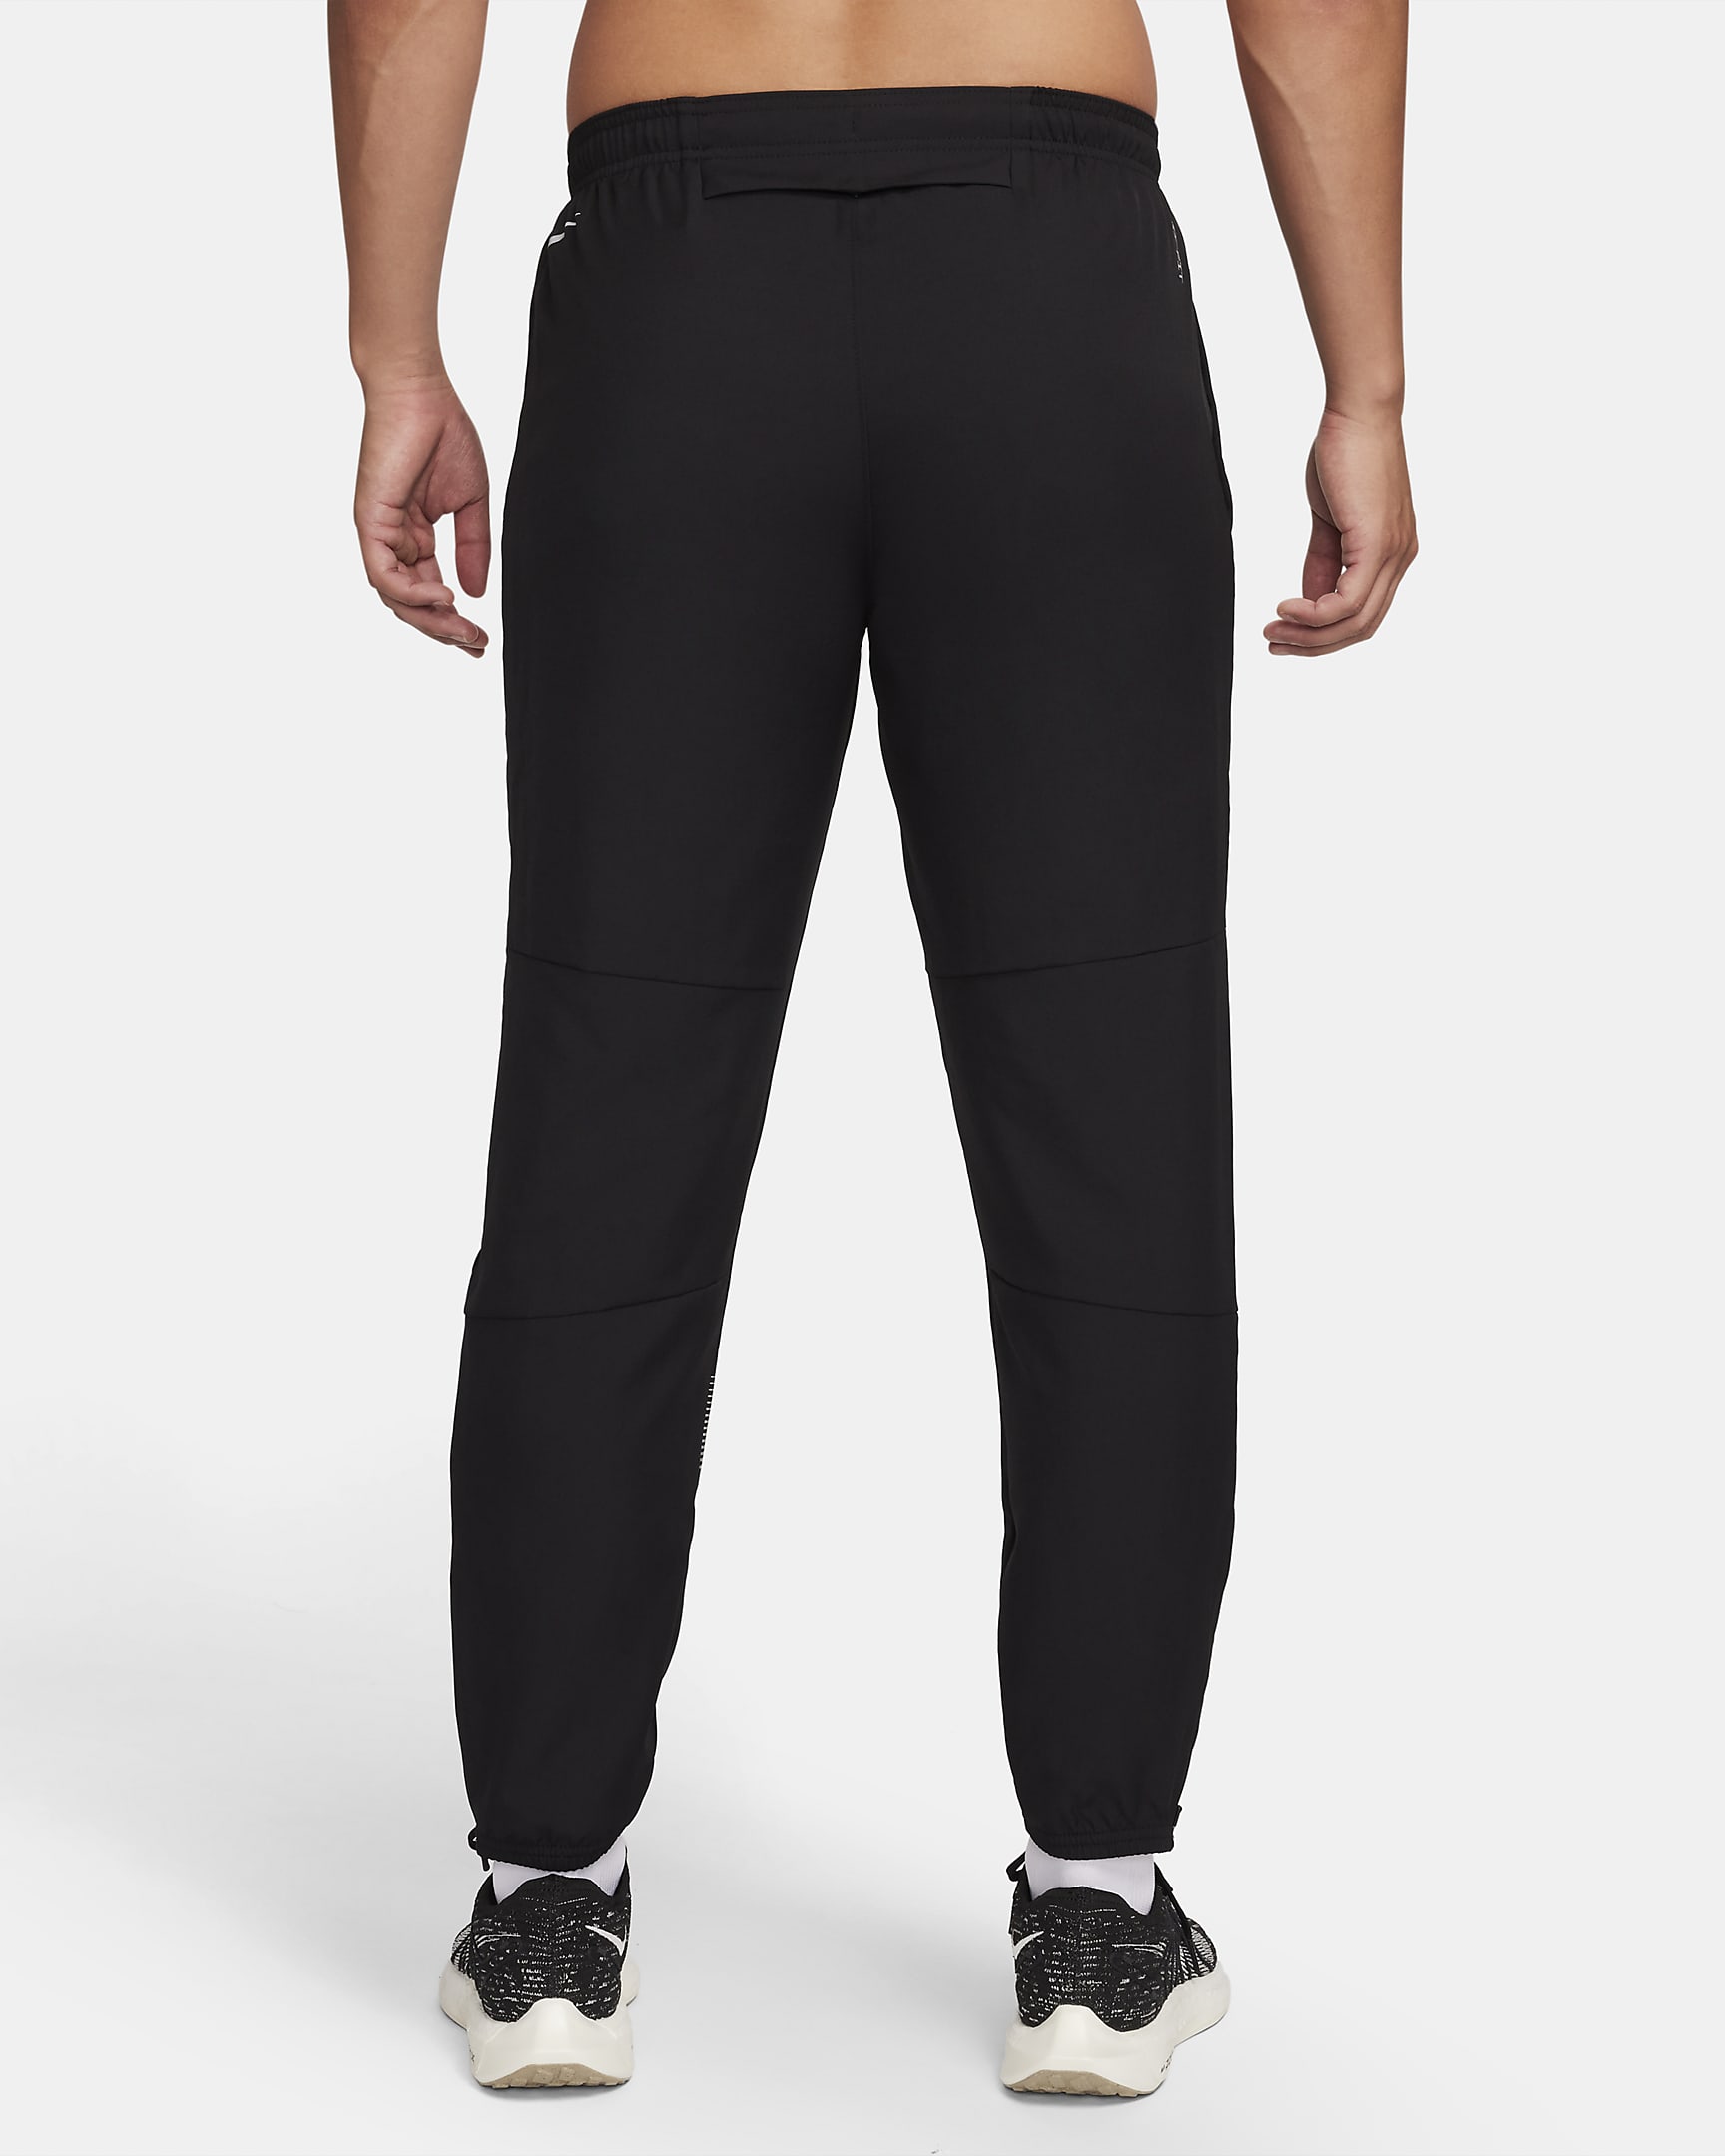 Nike Challenger Flash Men's Dri-FIT Woven Running Trousers. Nike IL